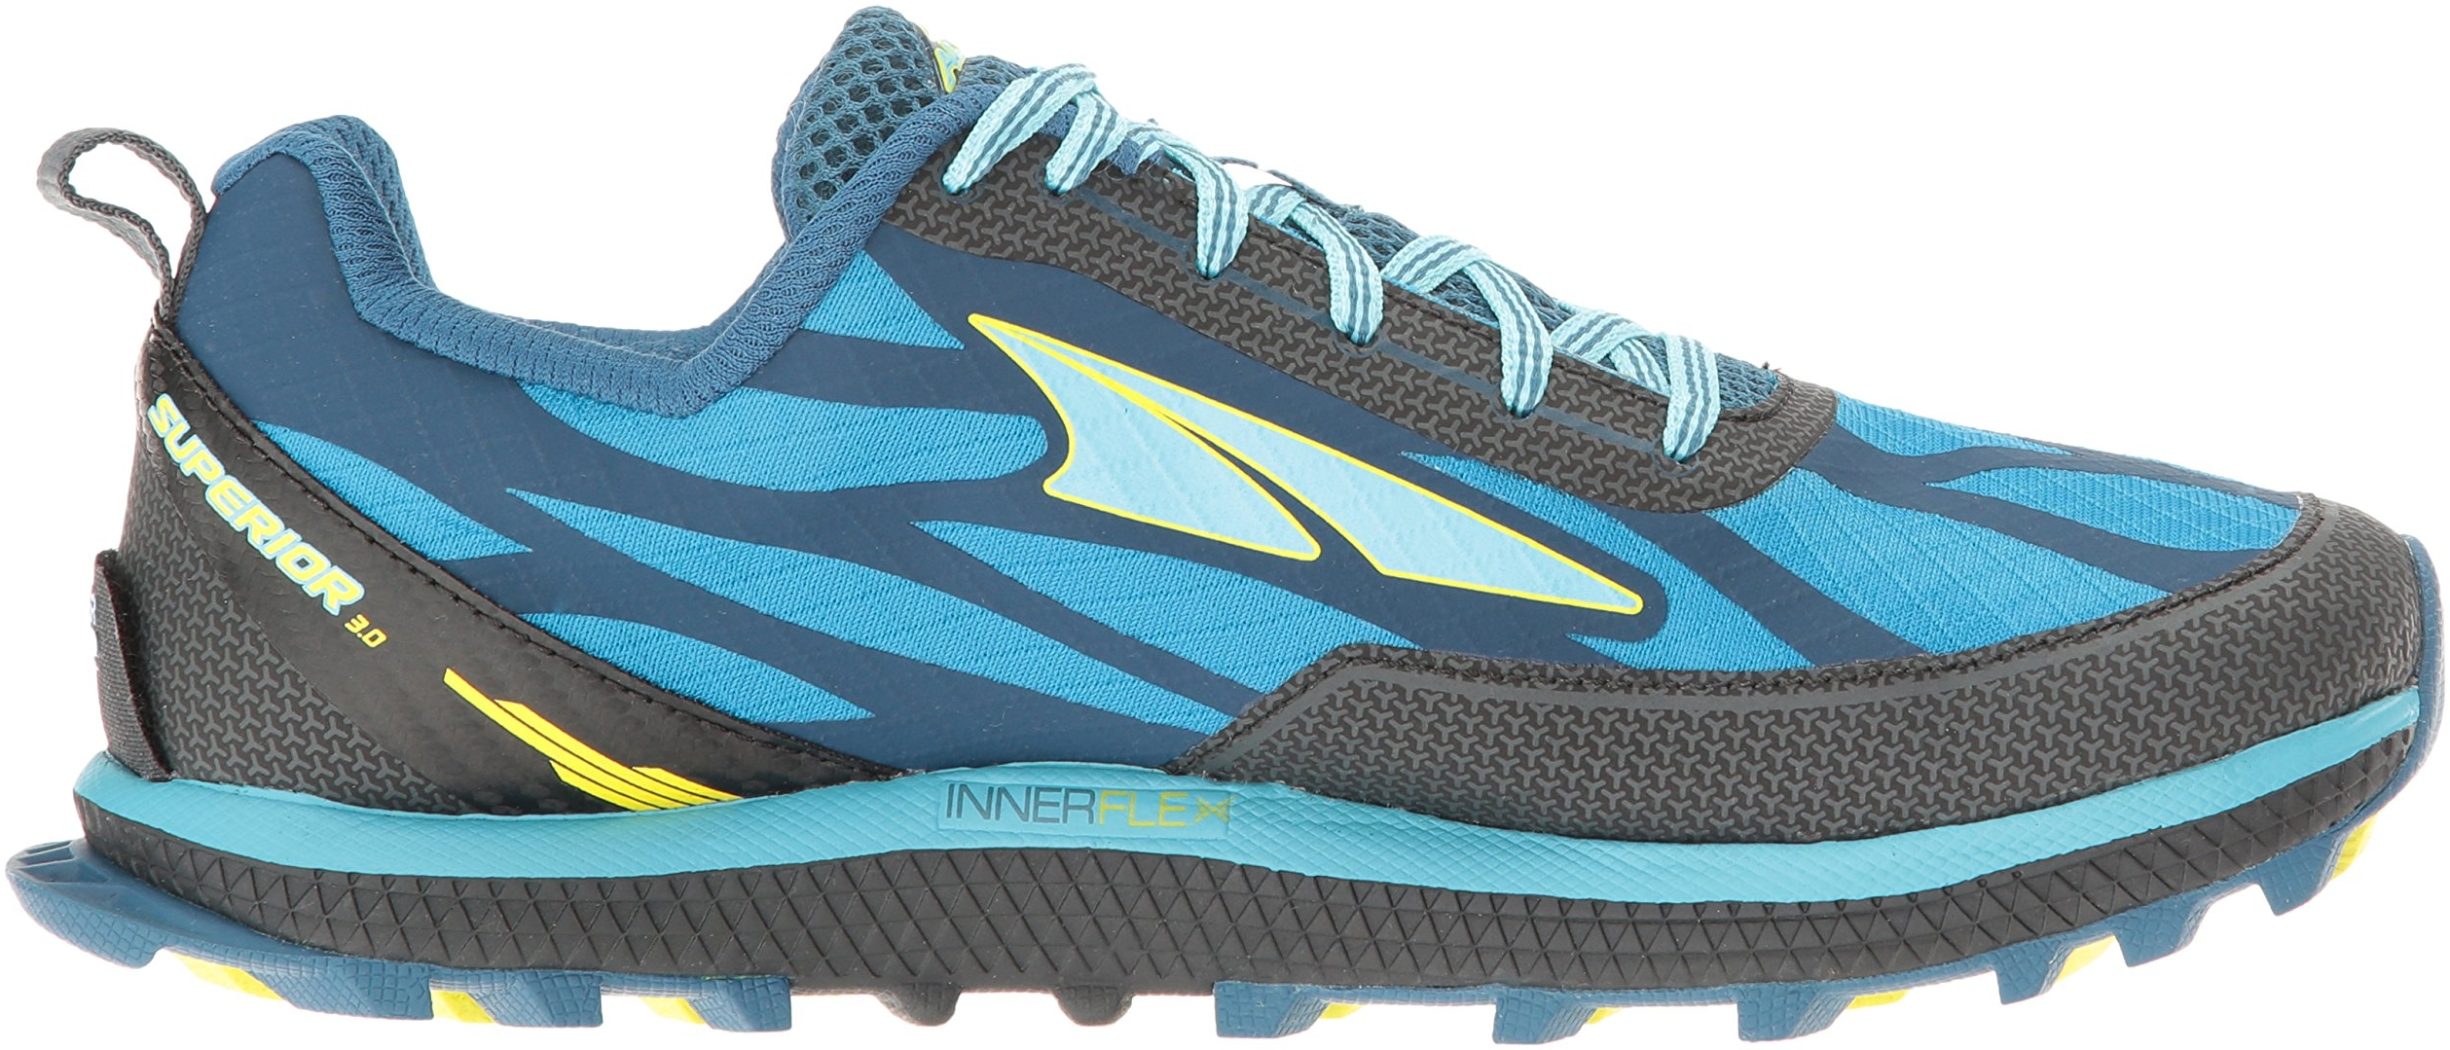 Only $88 + Review of Altra Superior 3.0 